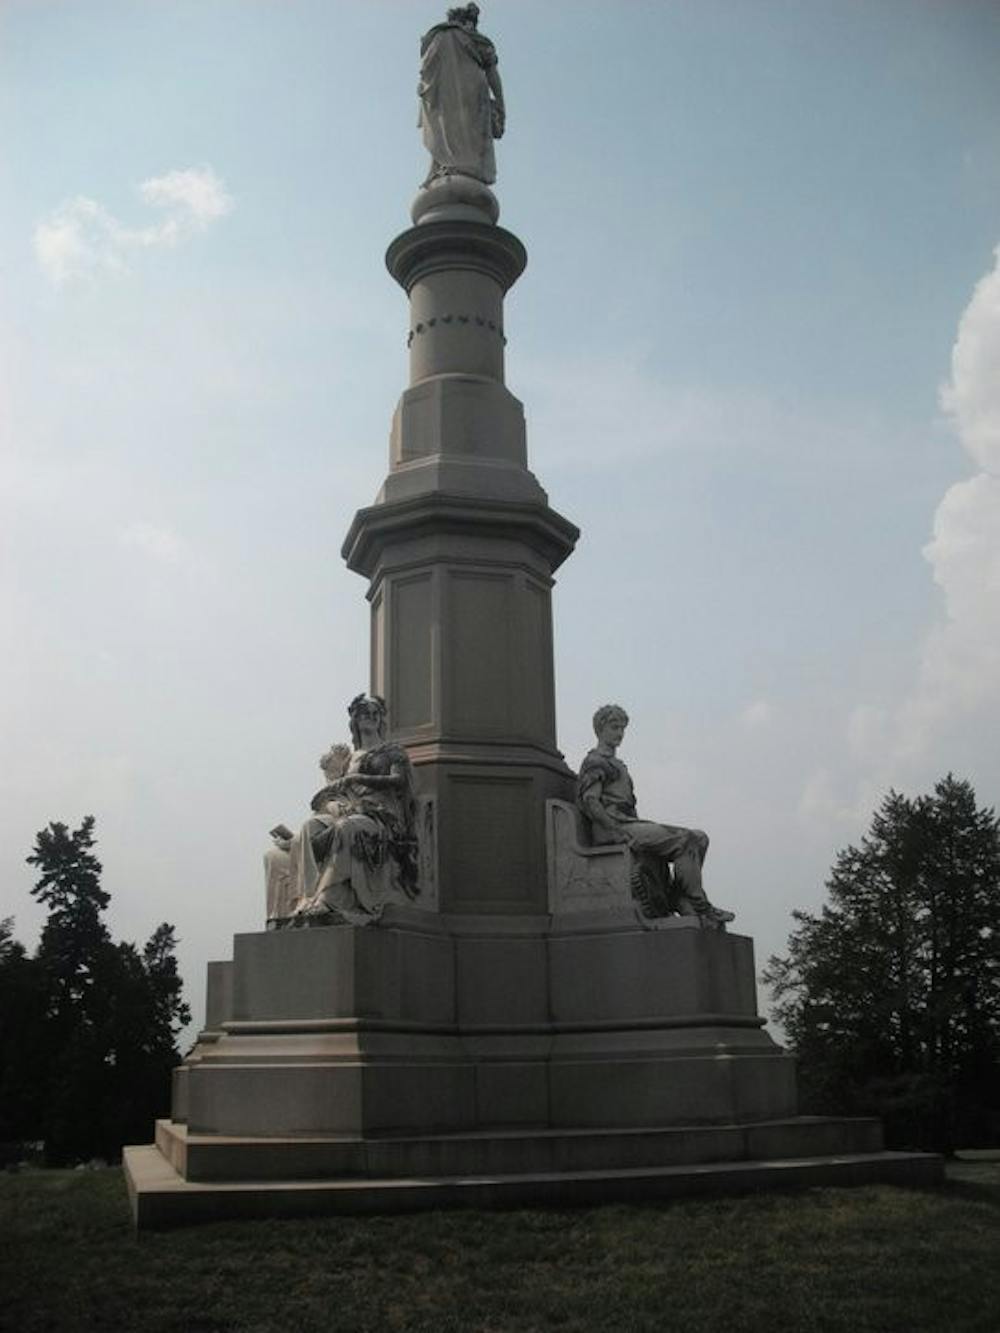  A monument for soldiers now stands at the exact spot where Abraham Lincoln gave his Gettysburg Address. In his speech, Lincoln honored the fallen, wounded, and fighting men who were helping to usher in a newly defined American freedom.